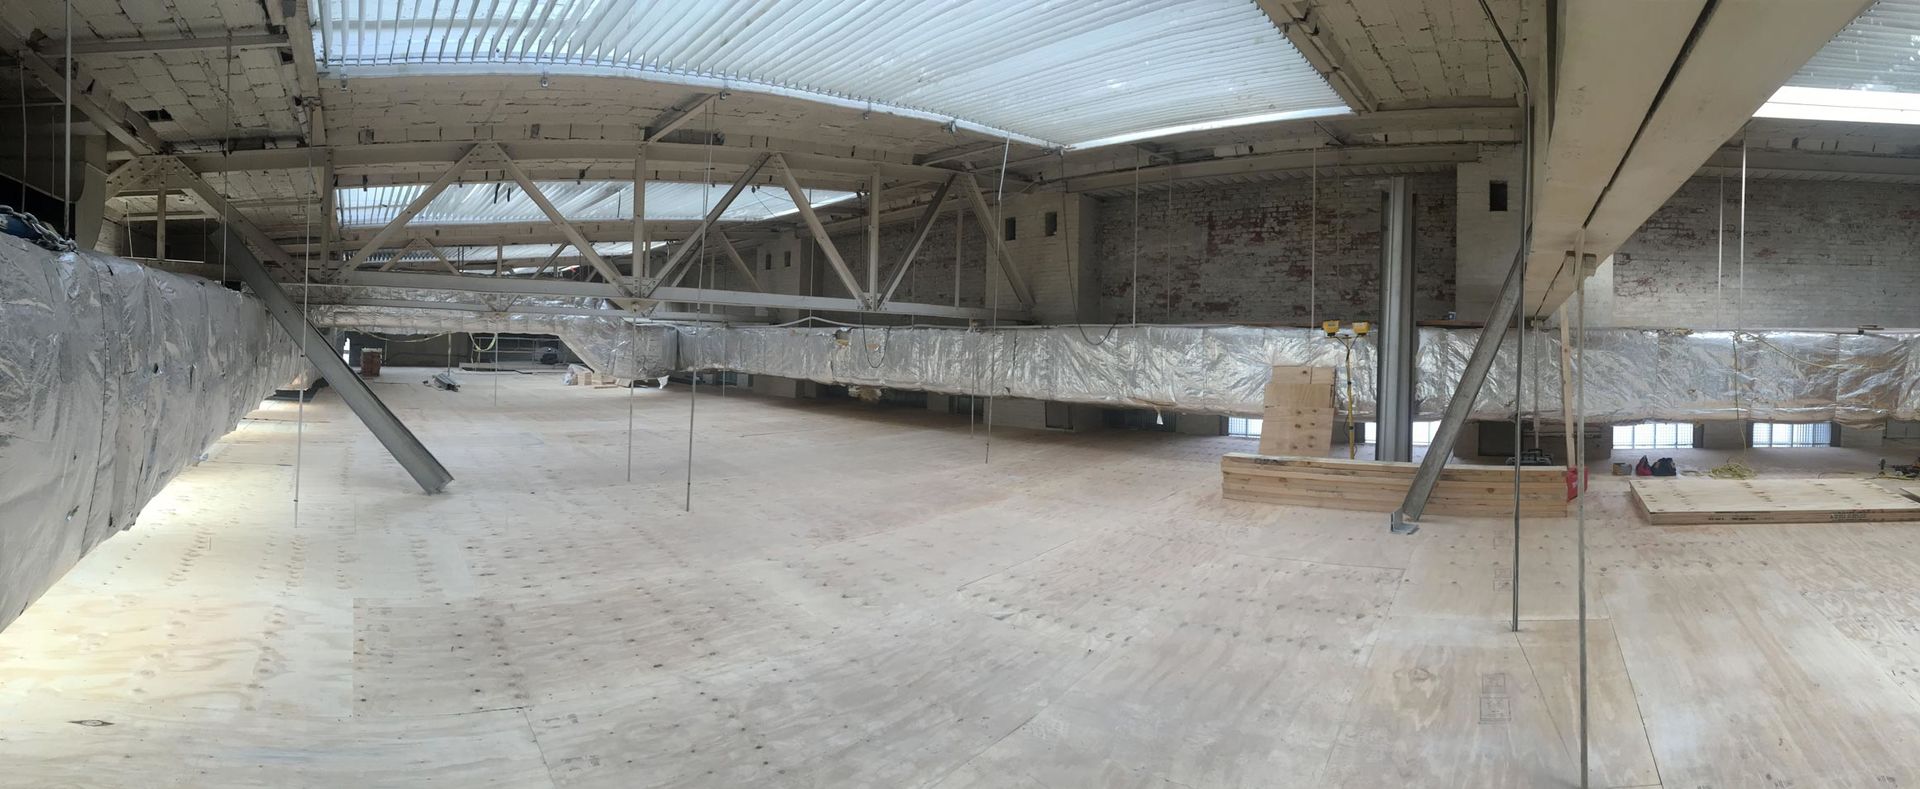 Panoramic image of attic space above The Met's European Paintings galleries under construction